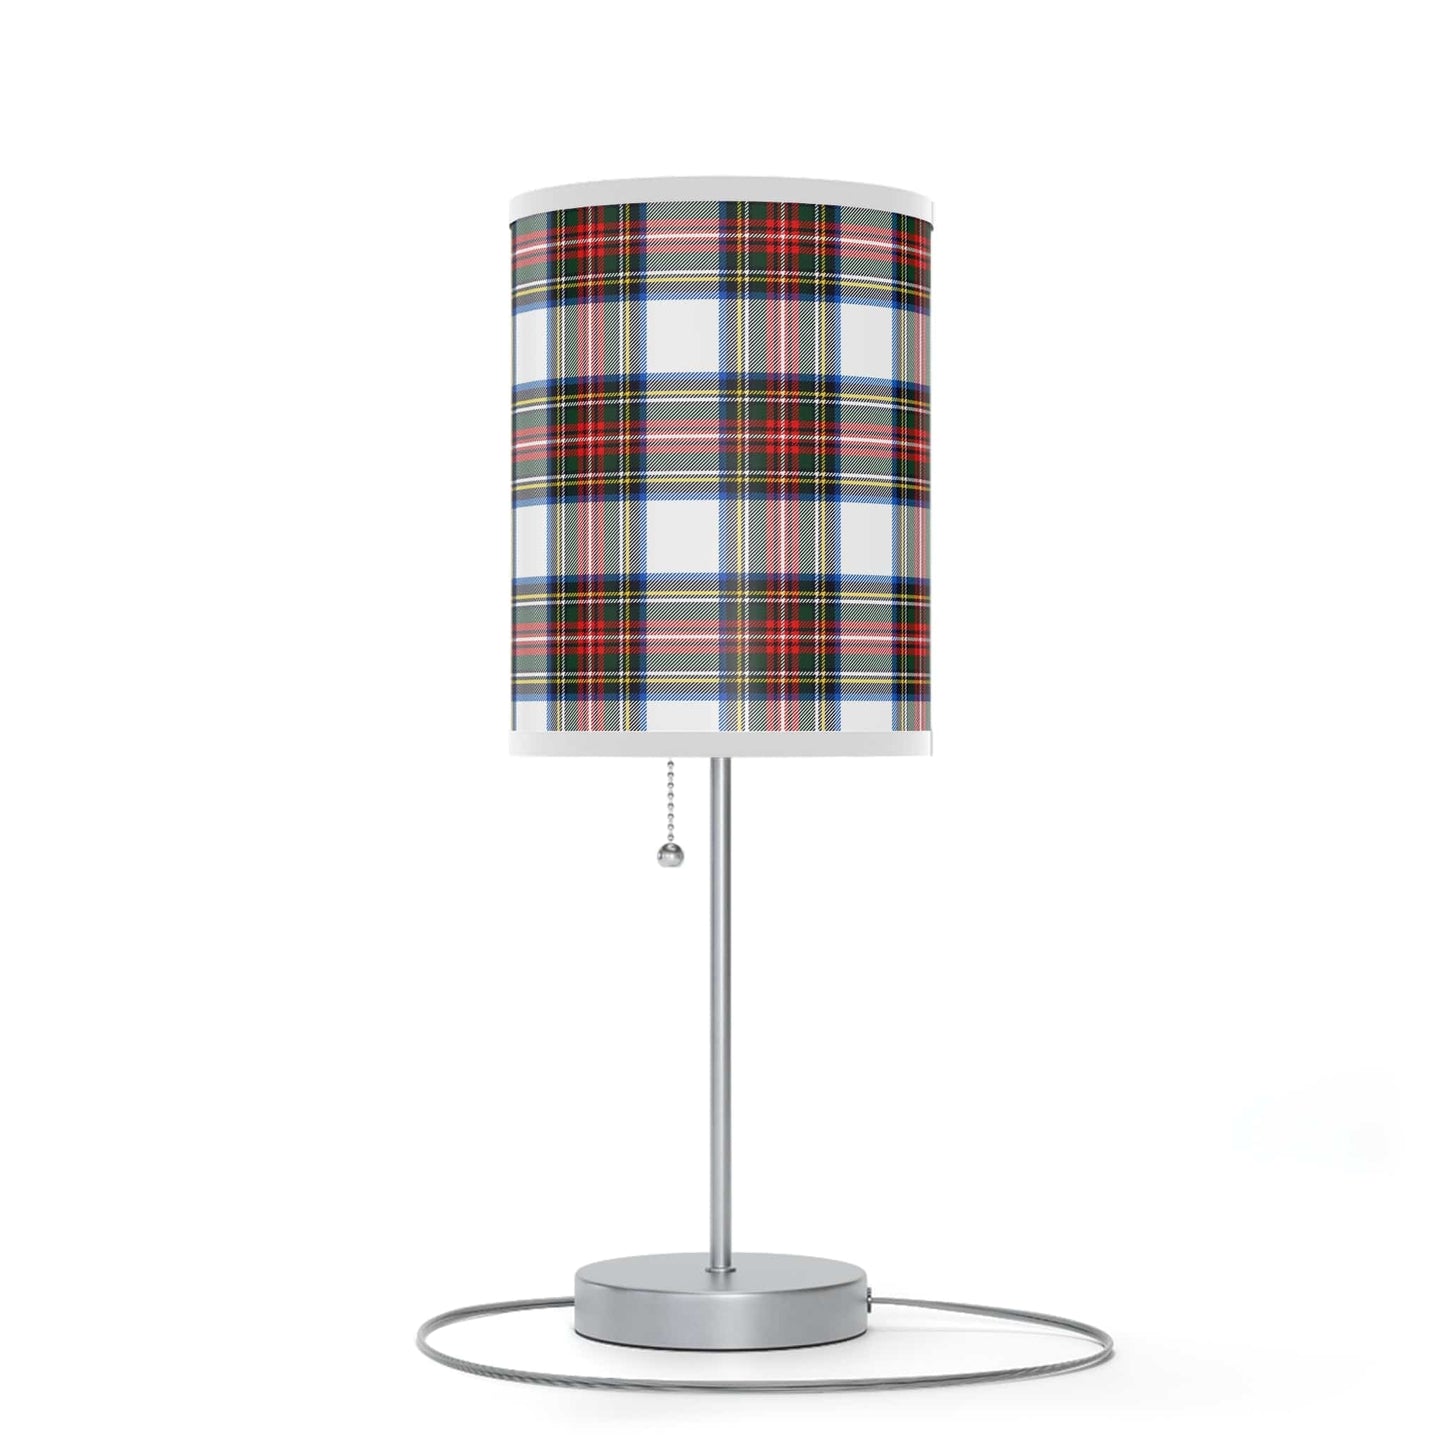 Scottish Checker Grid Table Lamp on a Stand (Type A Plug) Home Decor Pioneer Kitty Market   